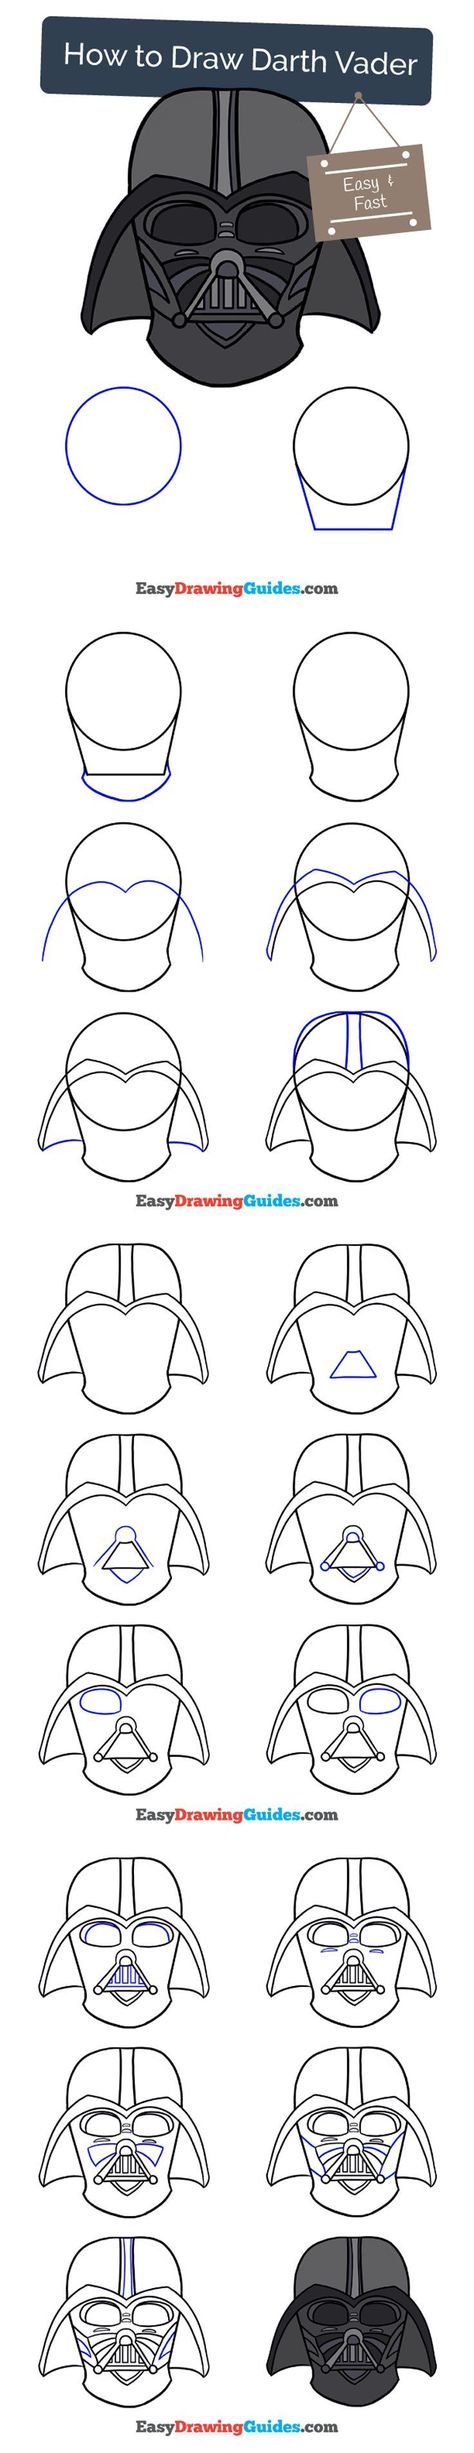 Learn How to Draw Darth Vader: Easy Step-by-Step Drawing Tutorial for Kids and Beginners. #darthvader #starwars #drawing #tutorial. See the full tutorial at https://easydrawingguides.com/draw-darth-vader/ Darth Vader Dibujo, Darth Vader Drawing, Drawing Disney, Easy Disney Drawings, Dark Vador, Drawing Tutorials For Kids, Cute Disney Drawings, Cuadros Star Wars, Doodle Art Journals